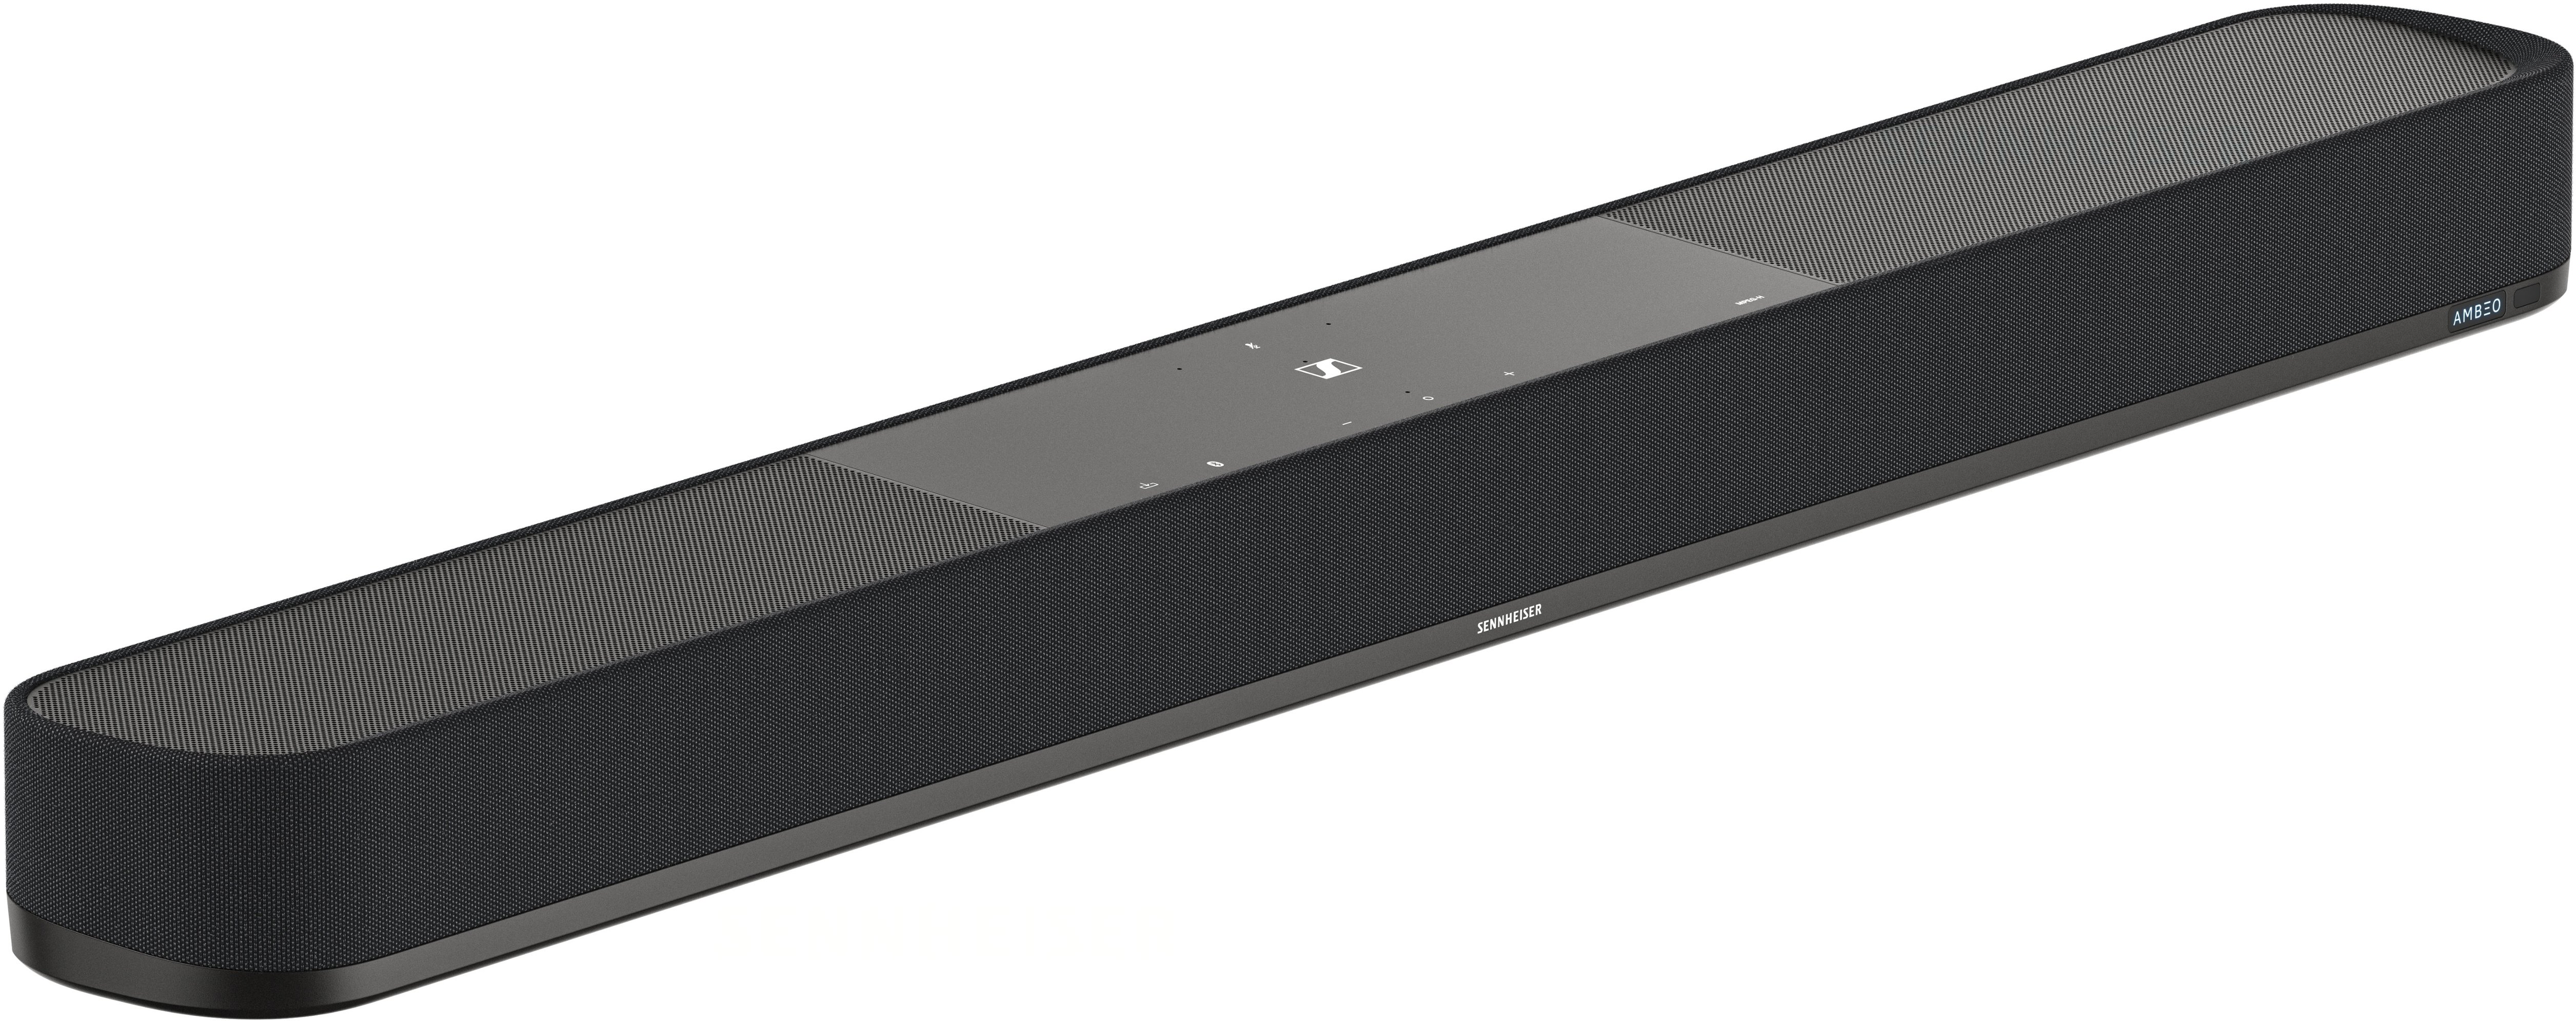 Angle View: Sennheiser - AMBEO Soundbar | Plus  7.1.4 Channel Soundbar Dual Built-in Subwoofers with Advanced Streaming Connectivity - Black